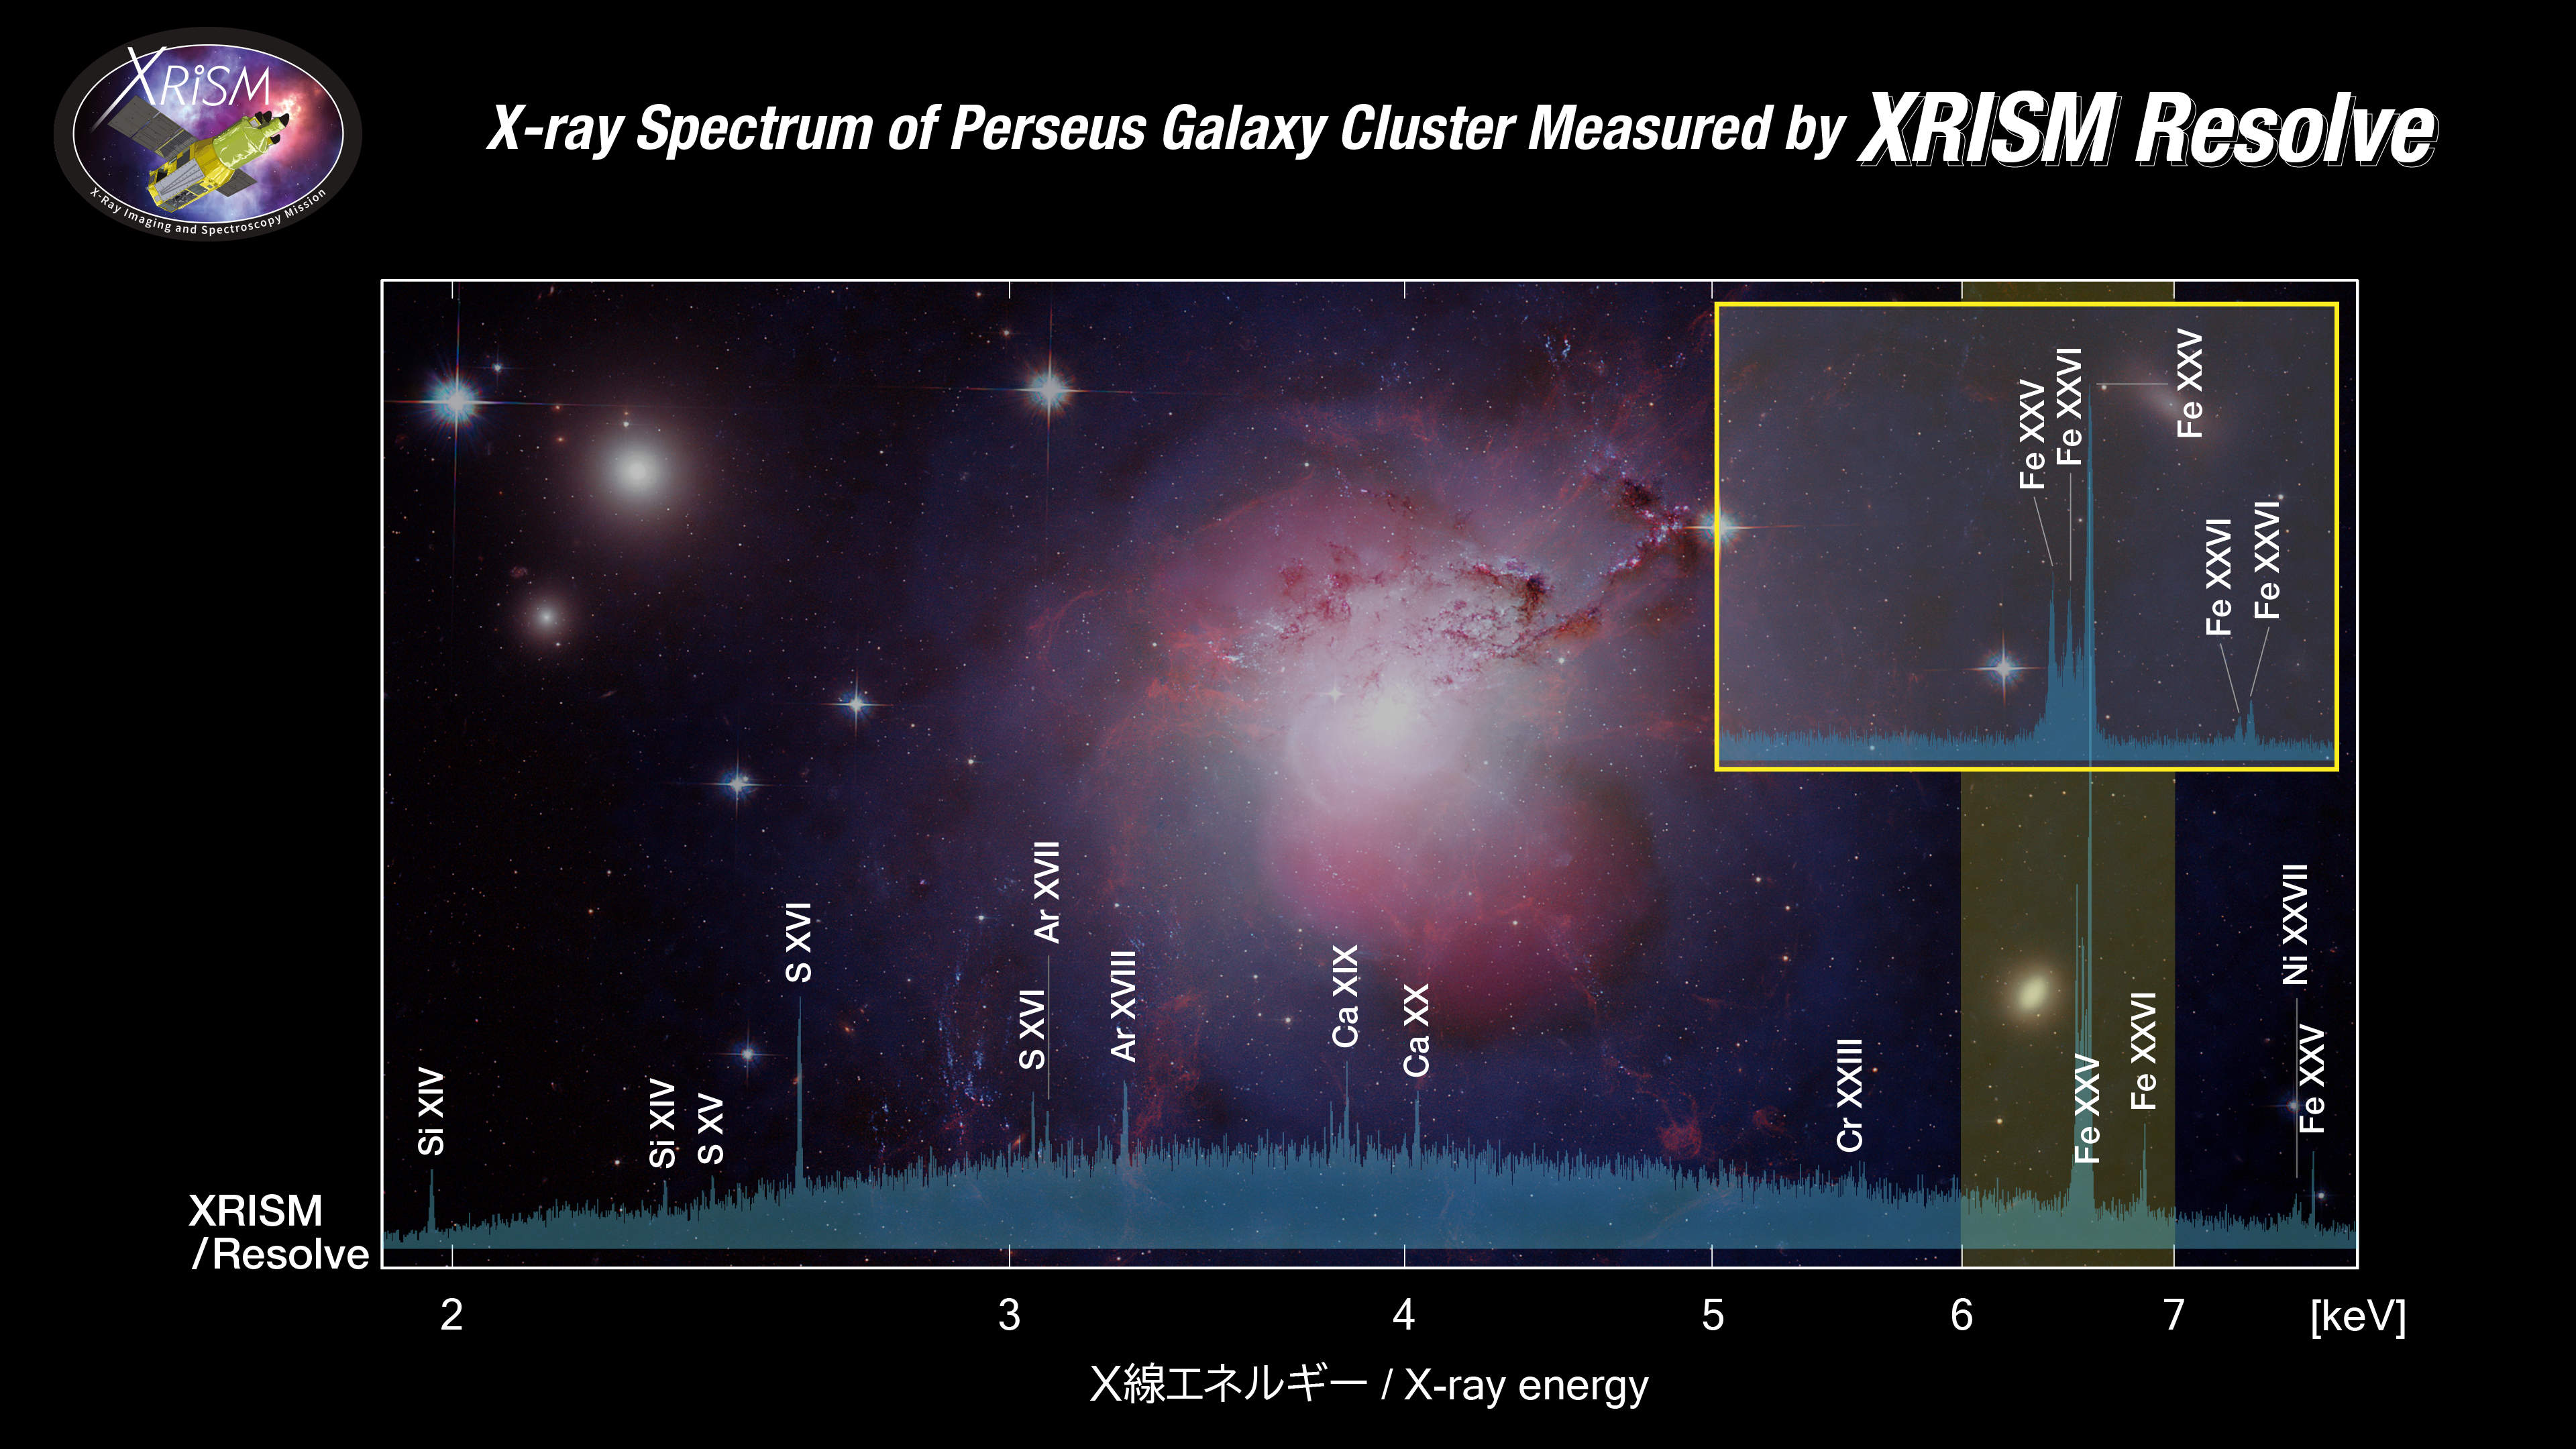 XRISM Resolve X-ray spectrum of the Perseus core overlaid on a composite x-ray, visible and radio image of the Perseus Cluster